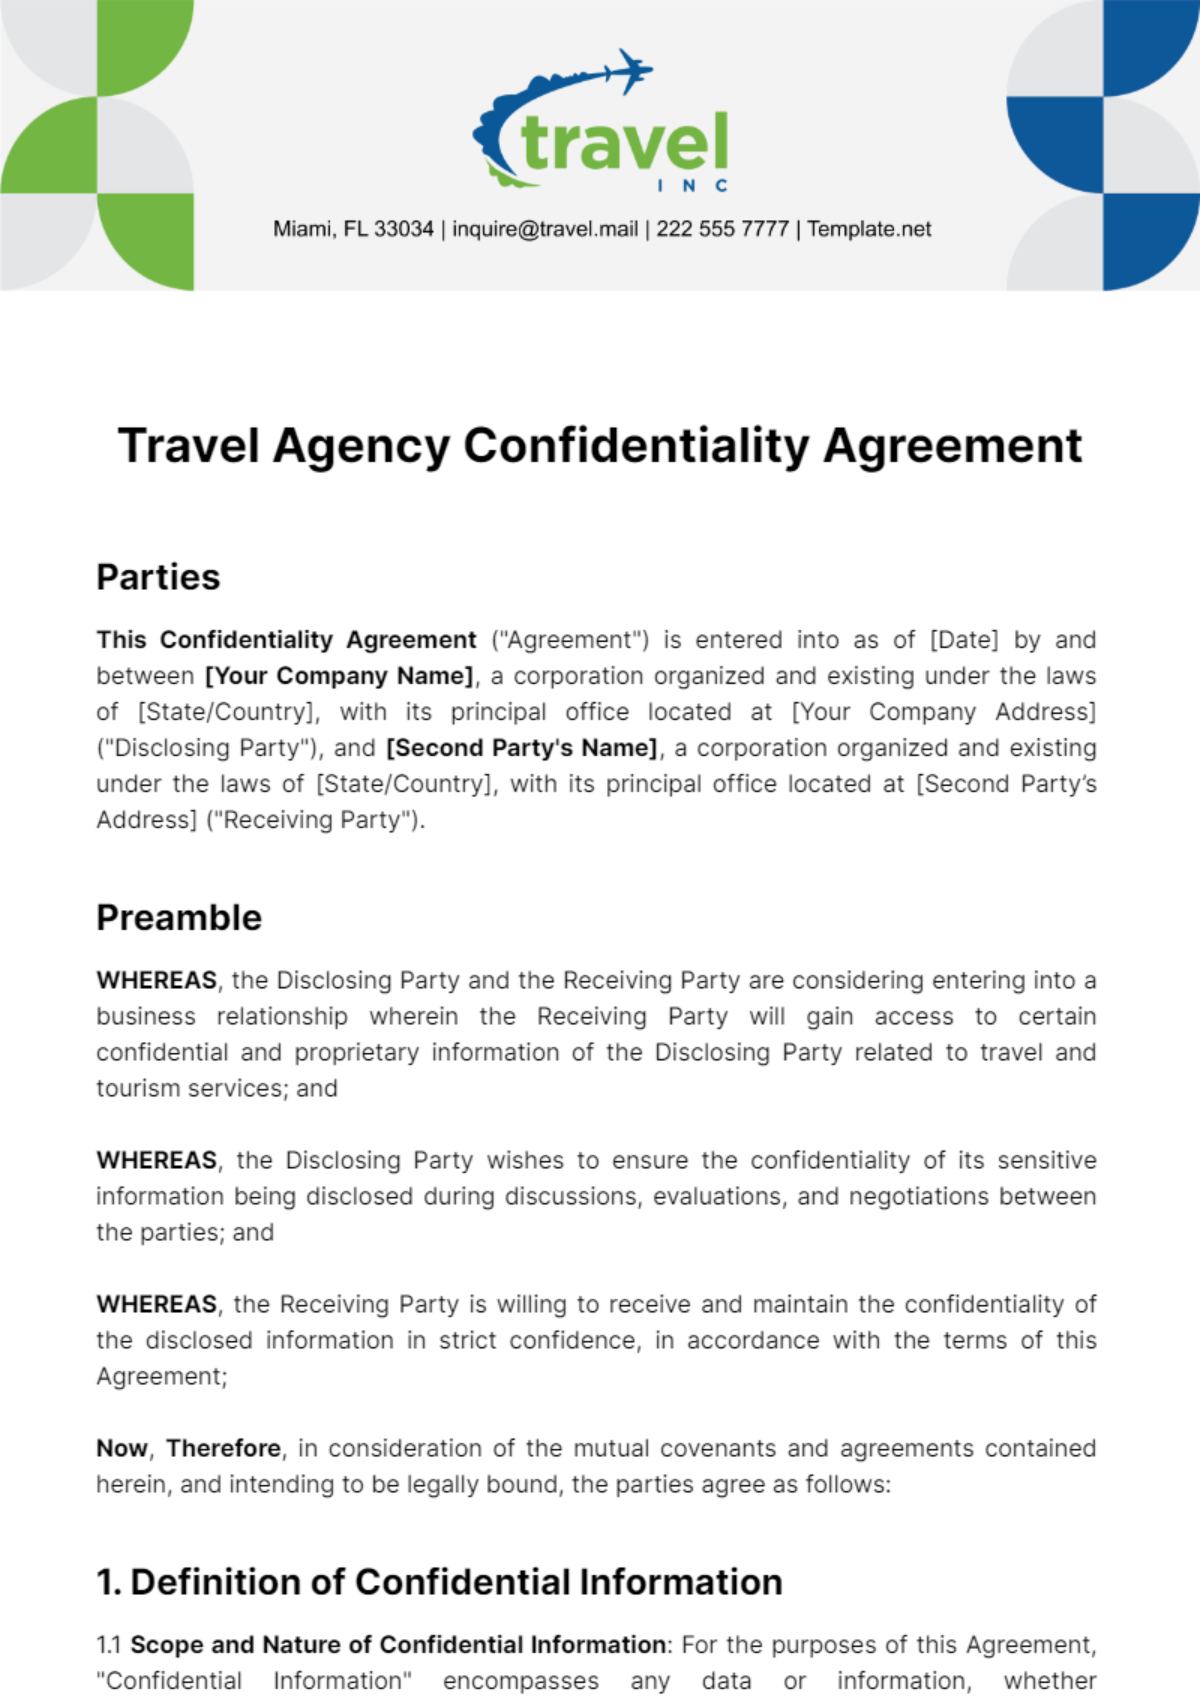 Free Travel Agency Confidentiality Agreement Template